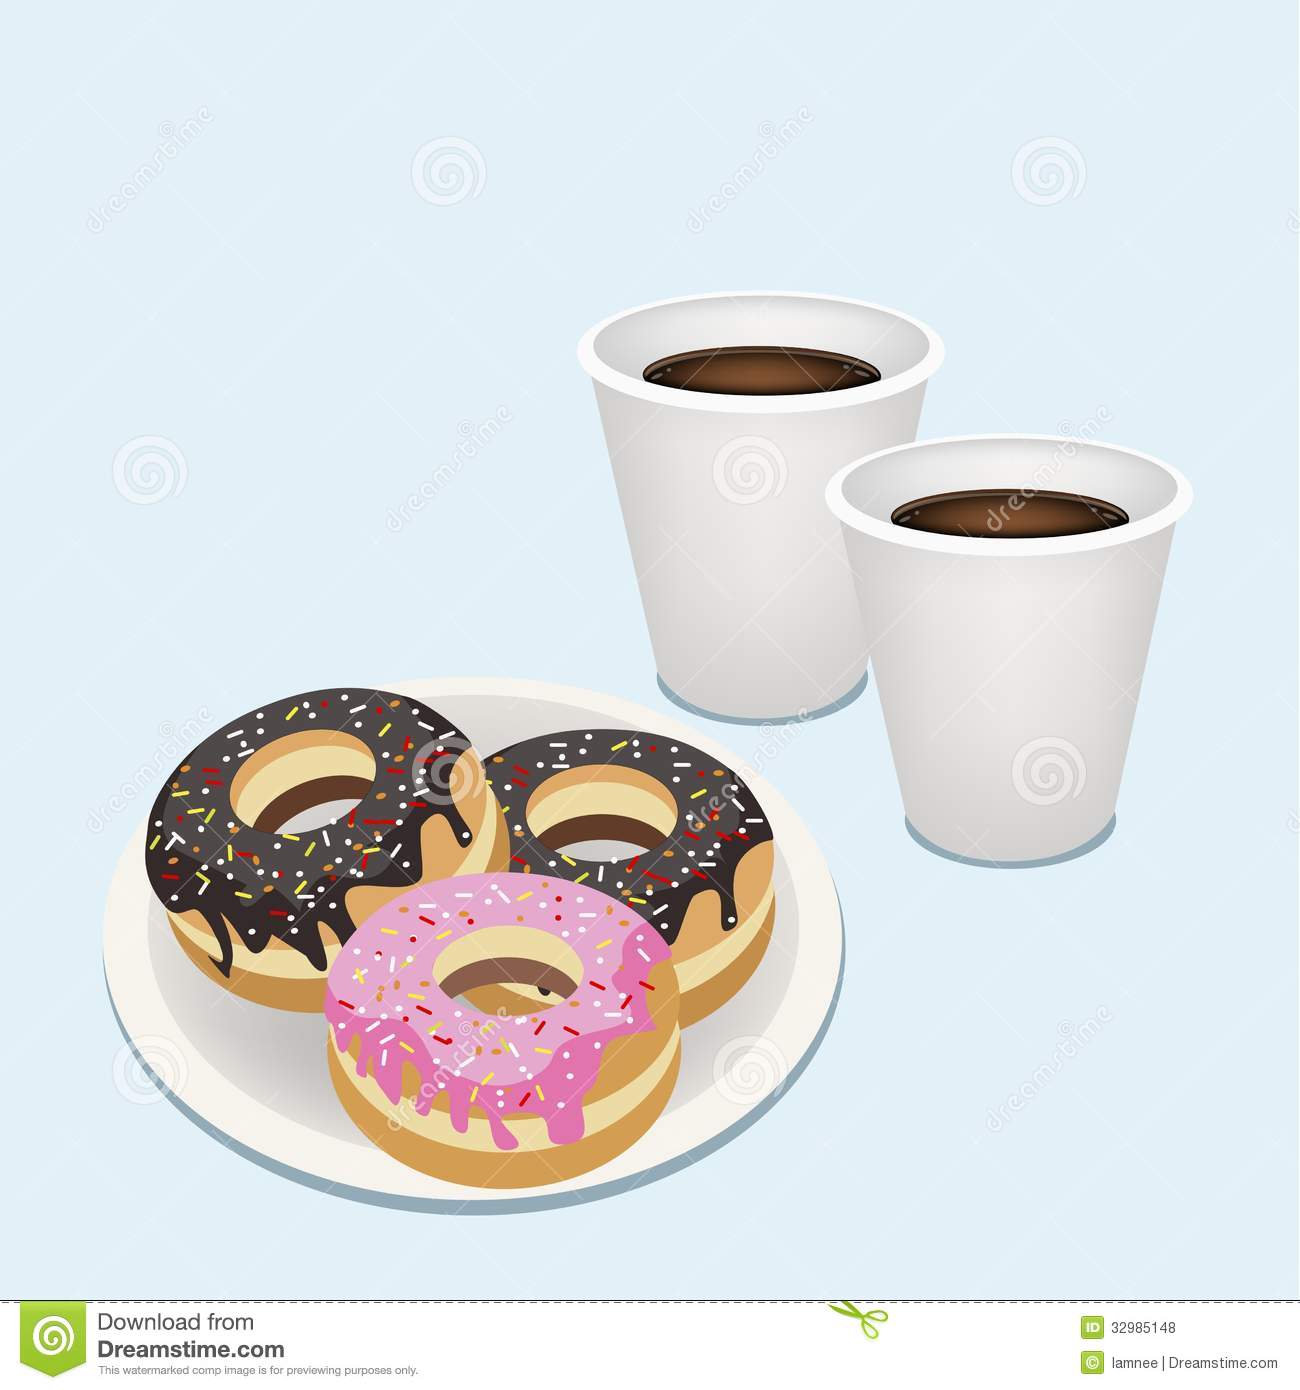 Coffee and Donuts Clip Art Fr